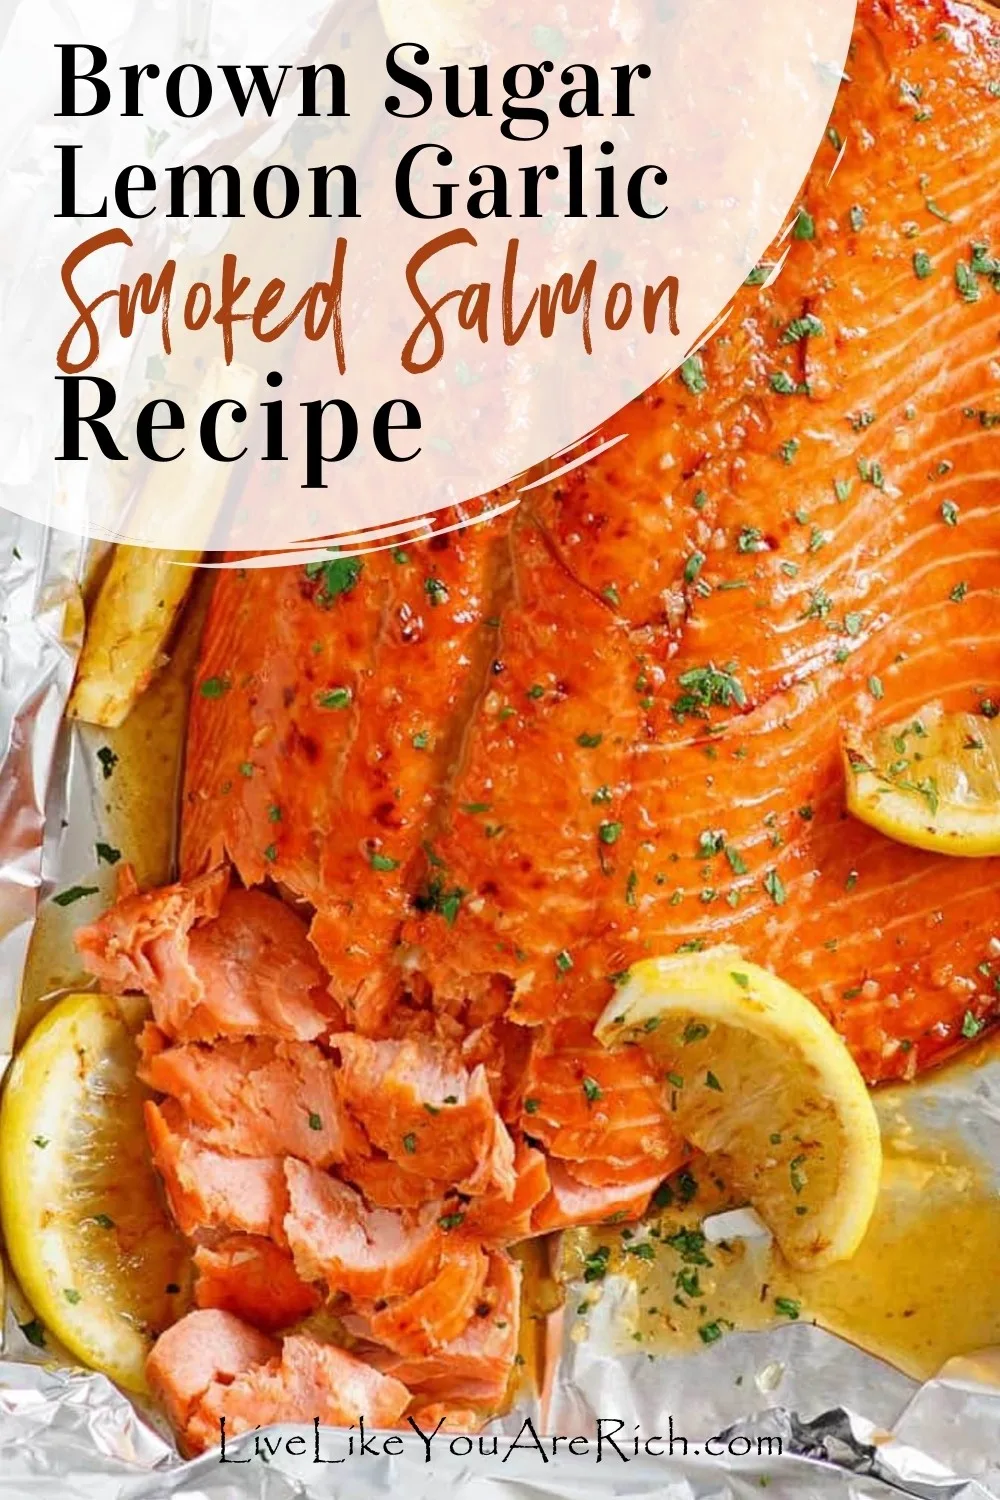 I love this Brown Sugar Lemon Garlic Smoked Salmon Recipe! It is soooo good! If you have a smoker, you really need to try it! This recipe has a perfect balance of spices. The sweet, smoked, and tart flavors balance out beautifully while the salmon smokes. 